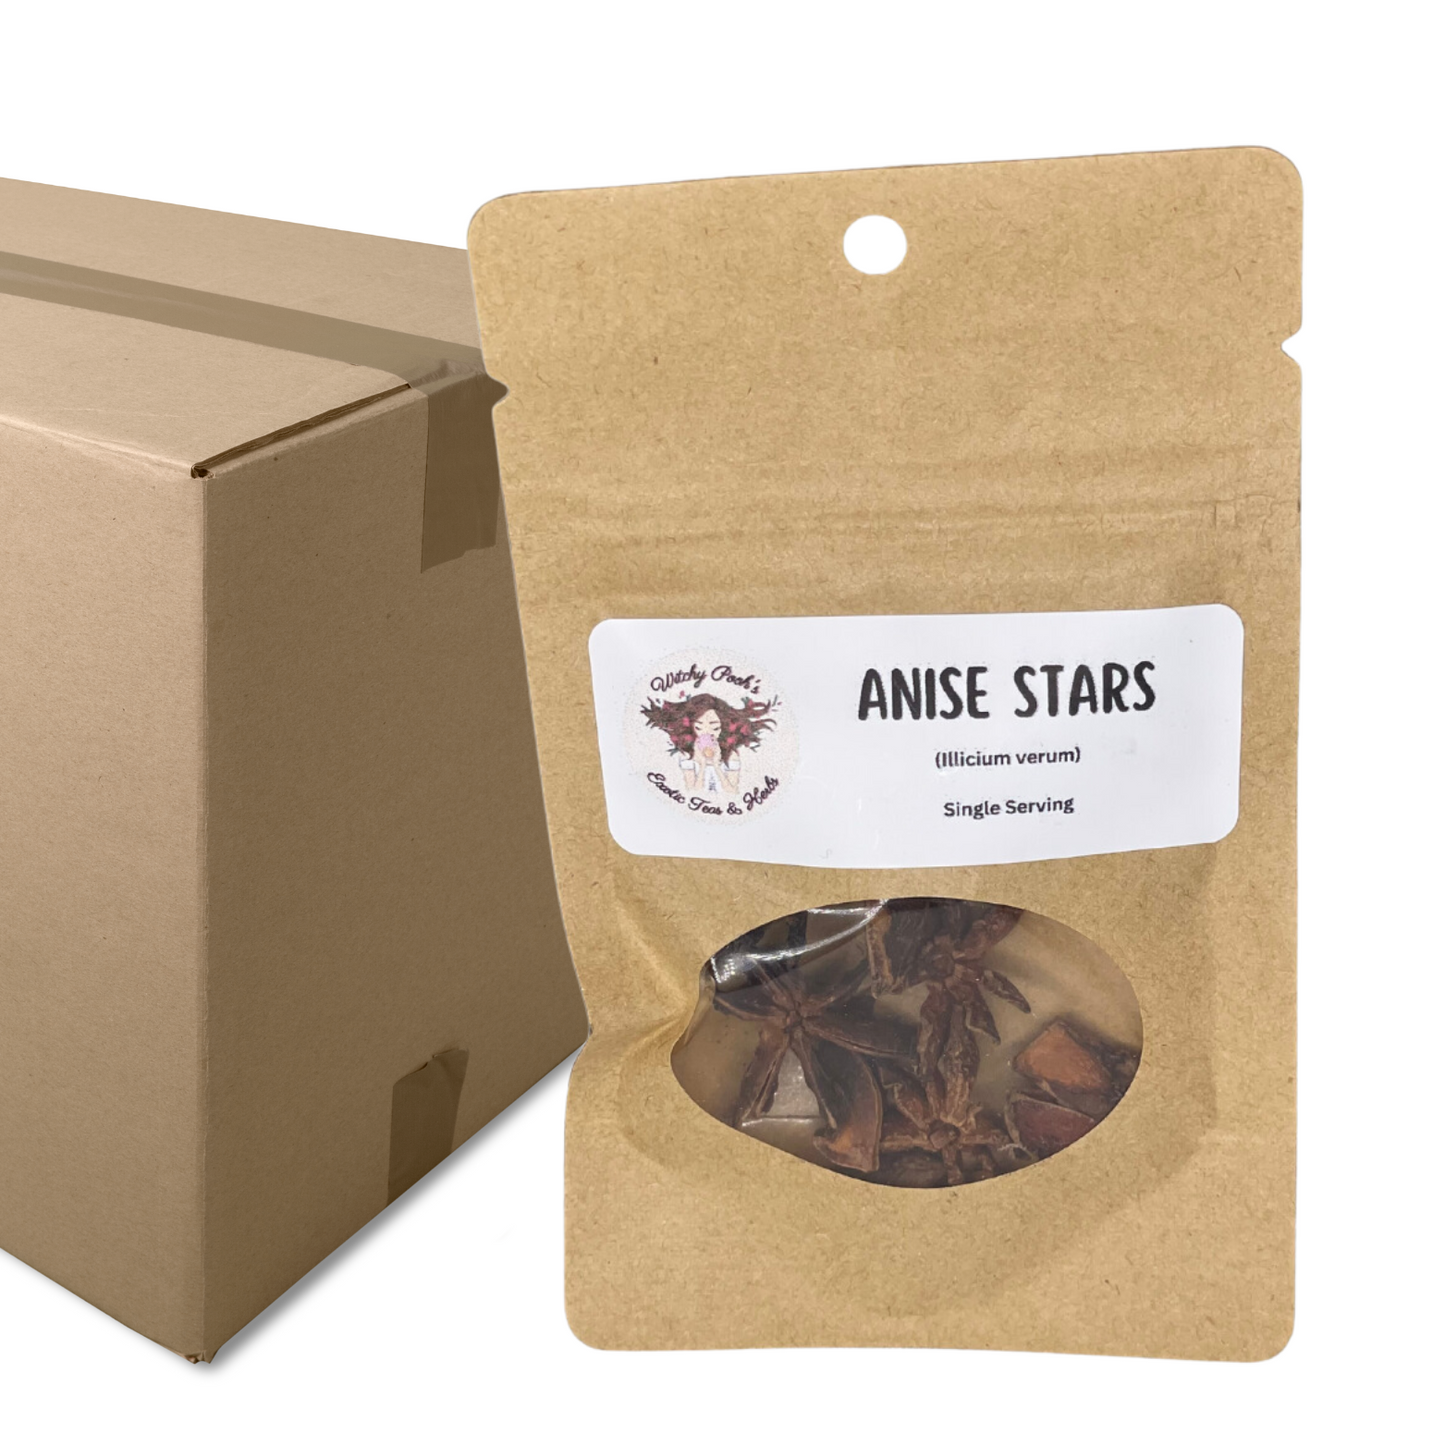 Witchy Pooh's Anise Stars Whole High Quality Strong Smell for Simmer Pots, Cooking and Ritual-21